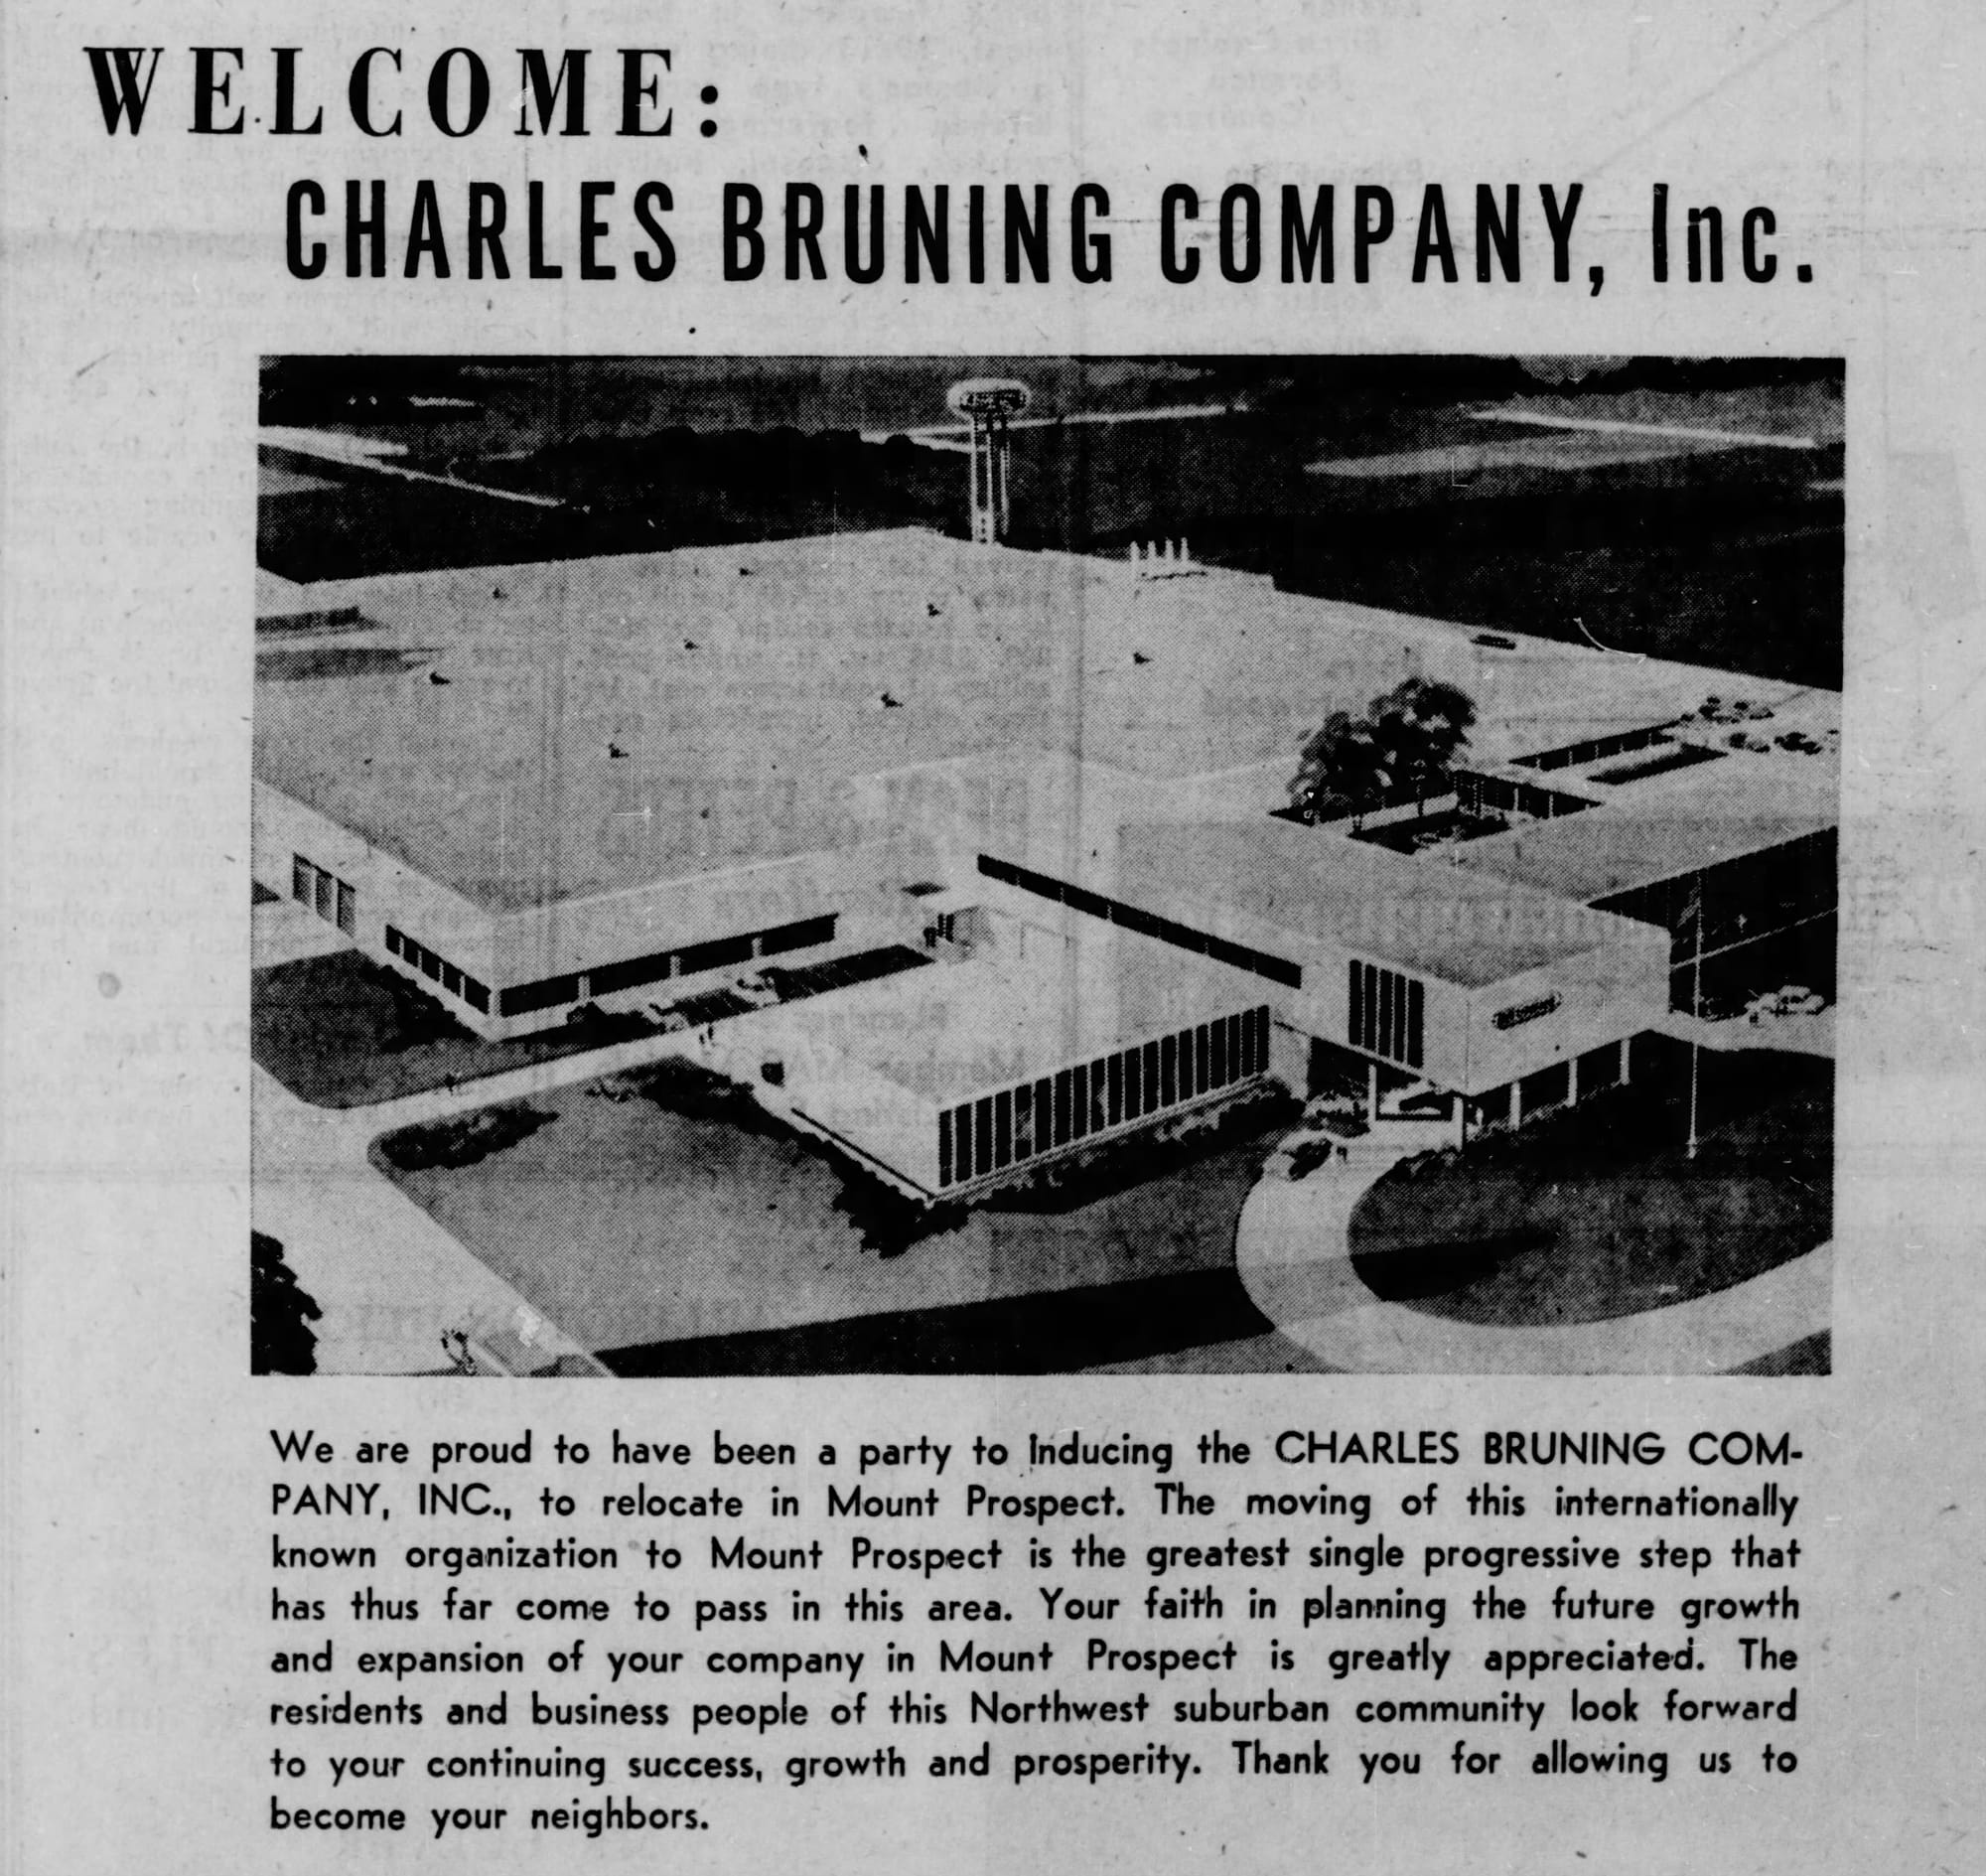 Charles Bruning Co., 4700 W. Montrose, Chicago